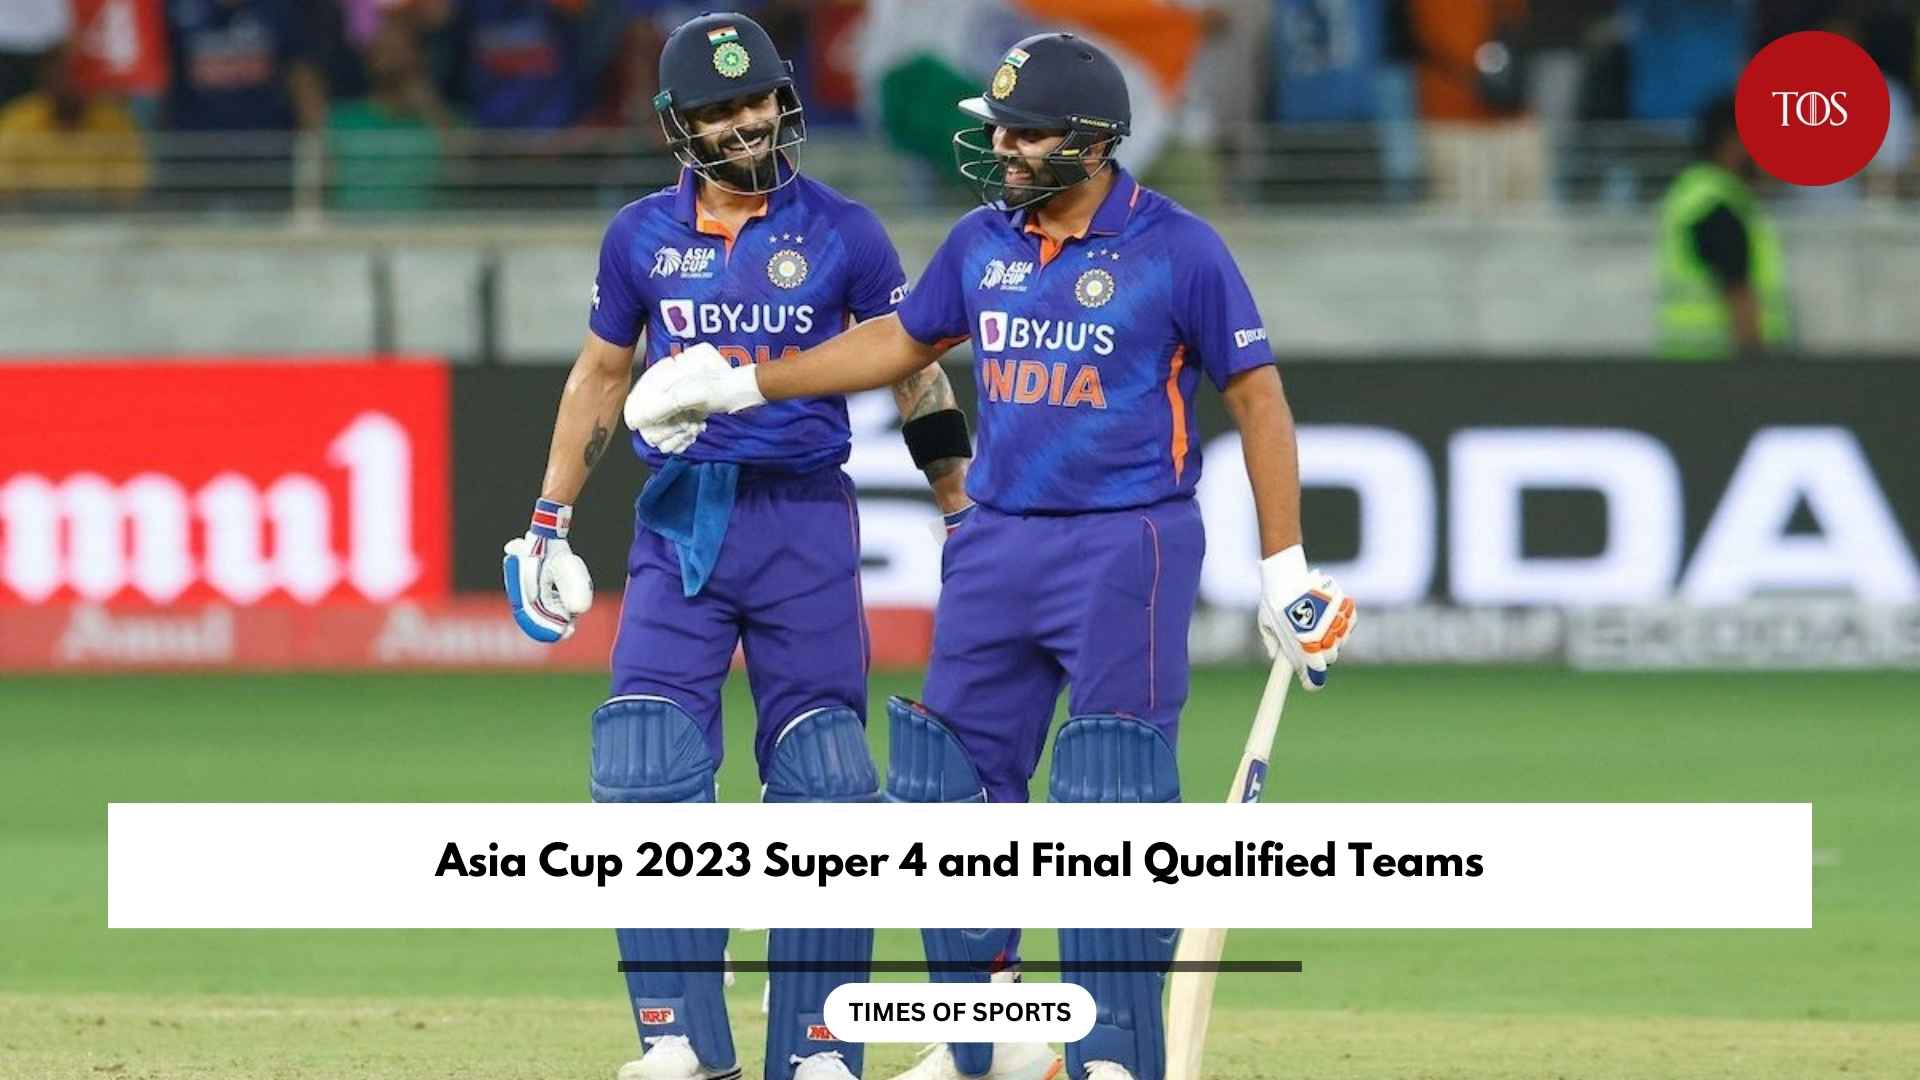 Asia Cup 2023 Super 4 and Final Qualified Teams